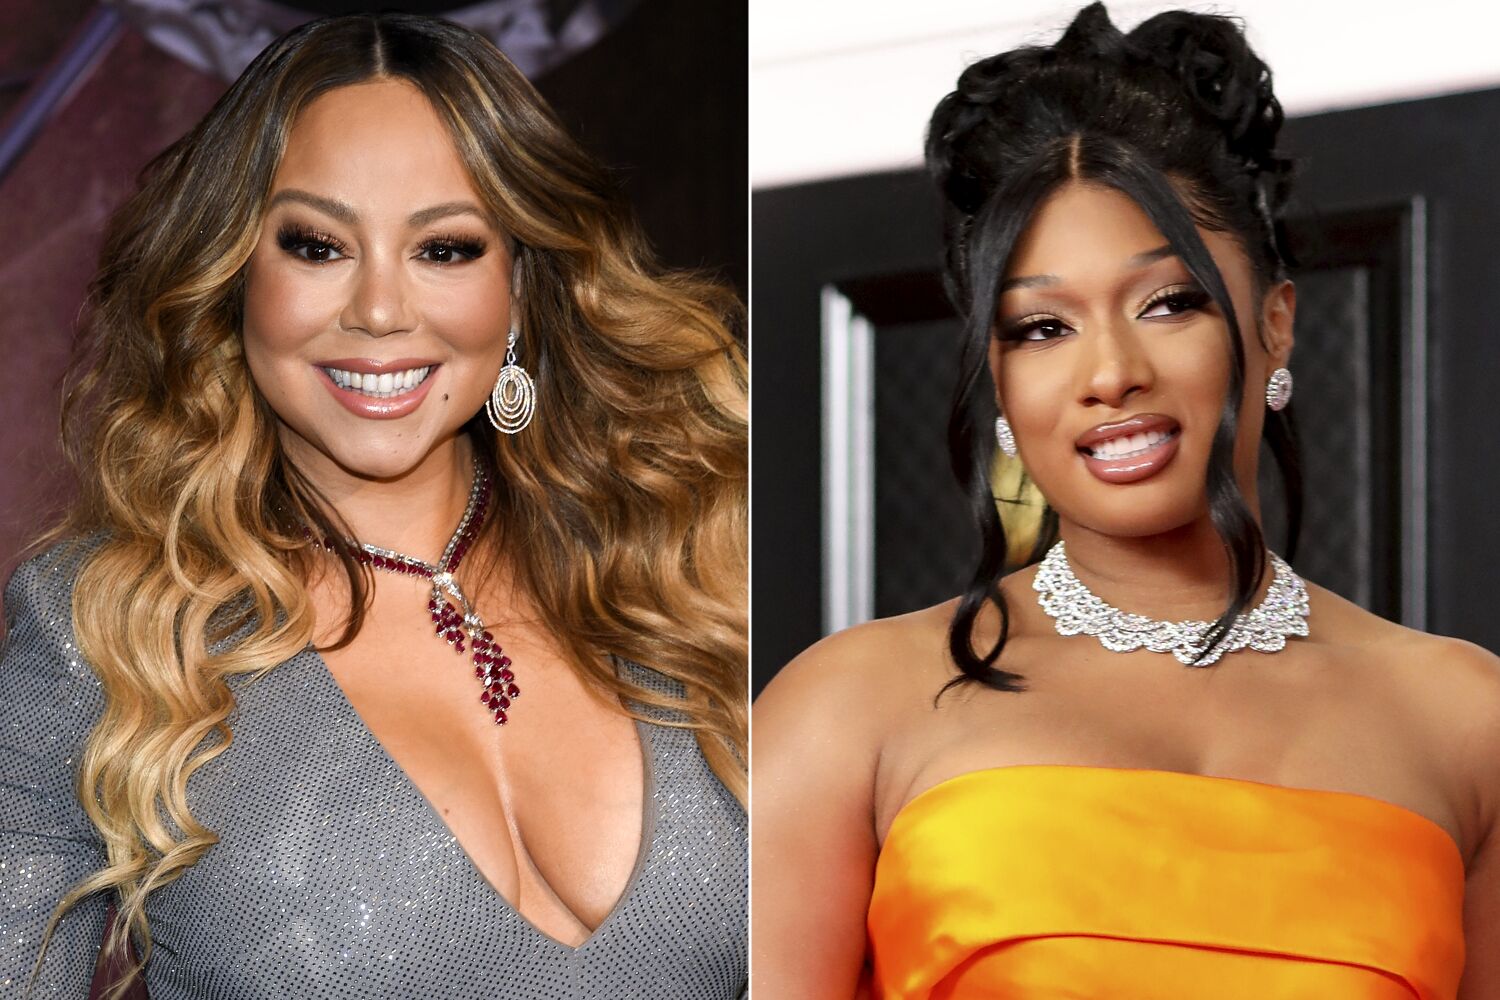 Mariah Carey and Megan Thee Stallion to headline L.A.'s Pride in the Park